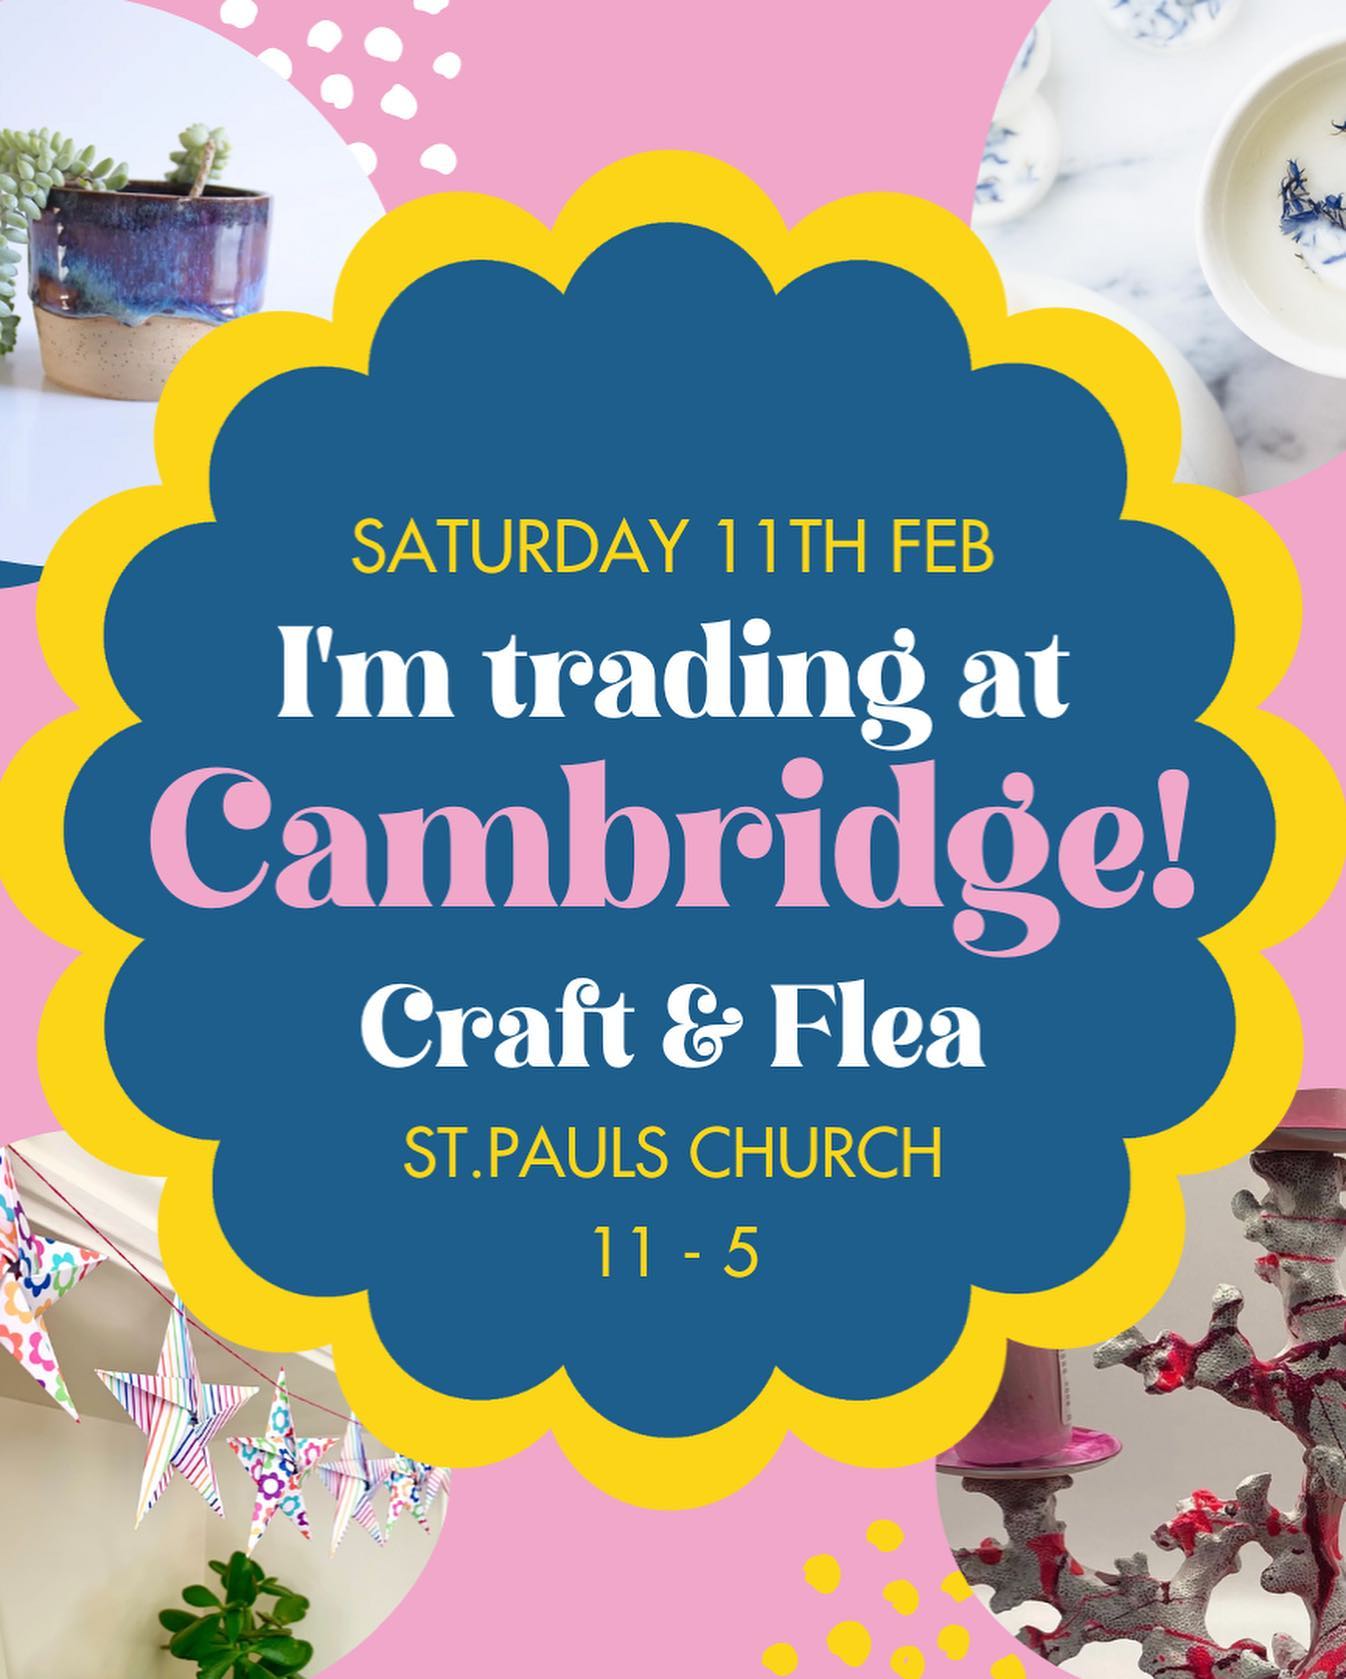 Back on home turf in a few days for @thecraftandflea We love this event! So many fabulous makers and artisans 11-5 at St Pauls Church on Hills Road. Tickets available through the link in their bio.#shoplical #shopsmall #shophandmade #supportingsmallbusinesses #home #craft #bespoke #homewarea #gingerandtweed #cambridge #lifestyle